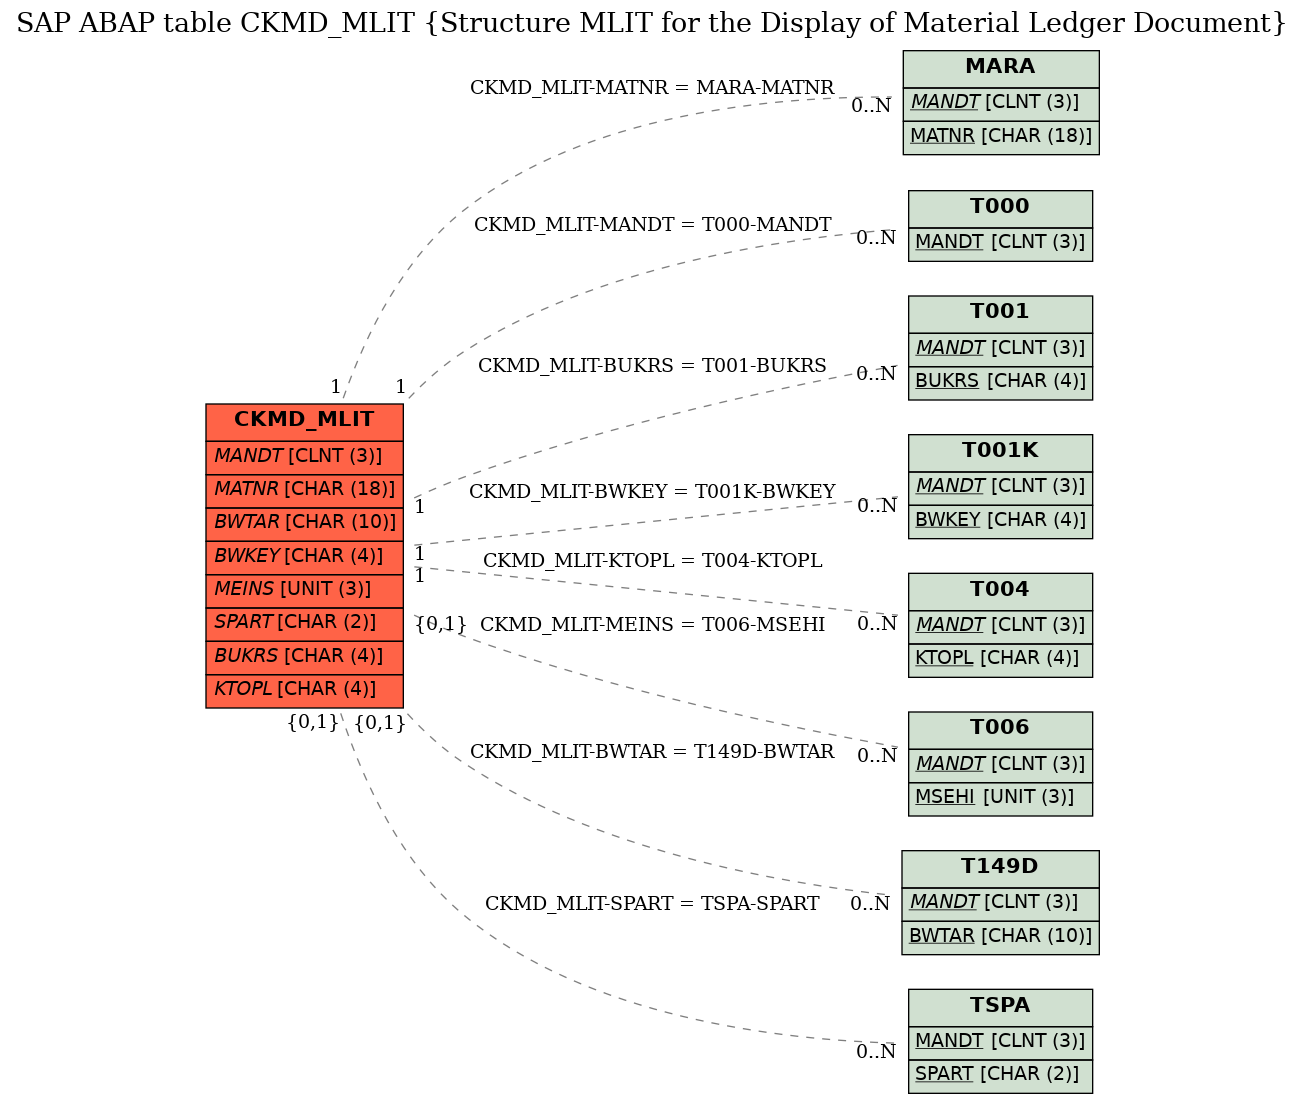 E-R Diagram for table CKMD_MLIT (Structure MLIT for the Display of Material Ledger Document)